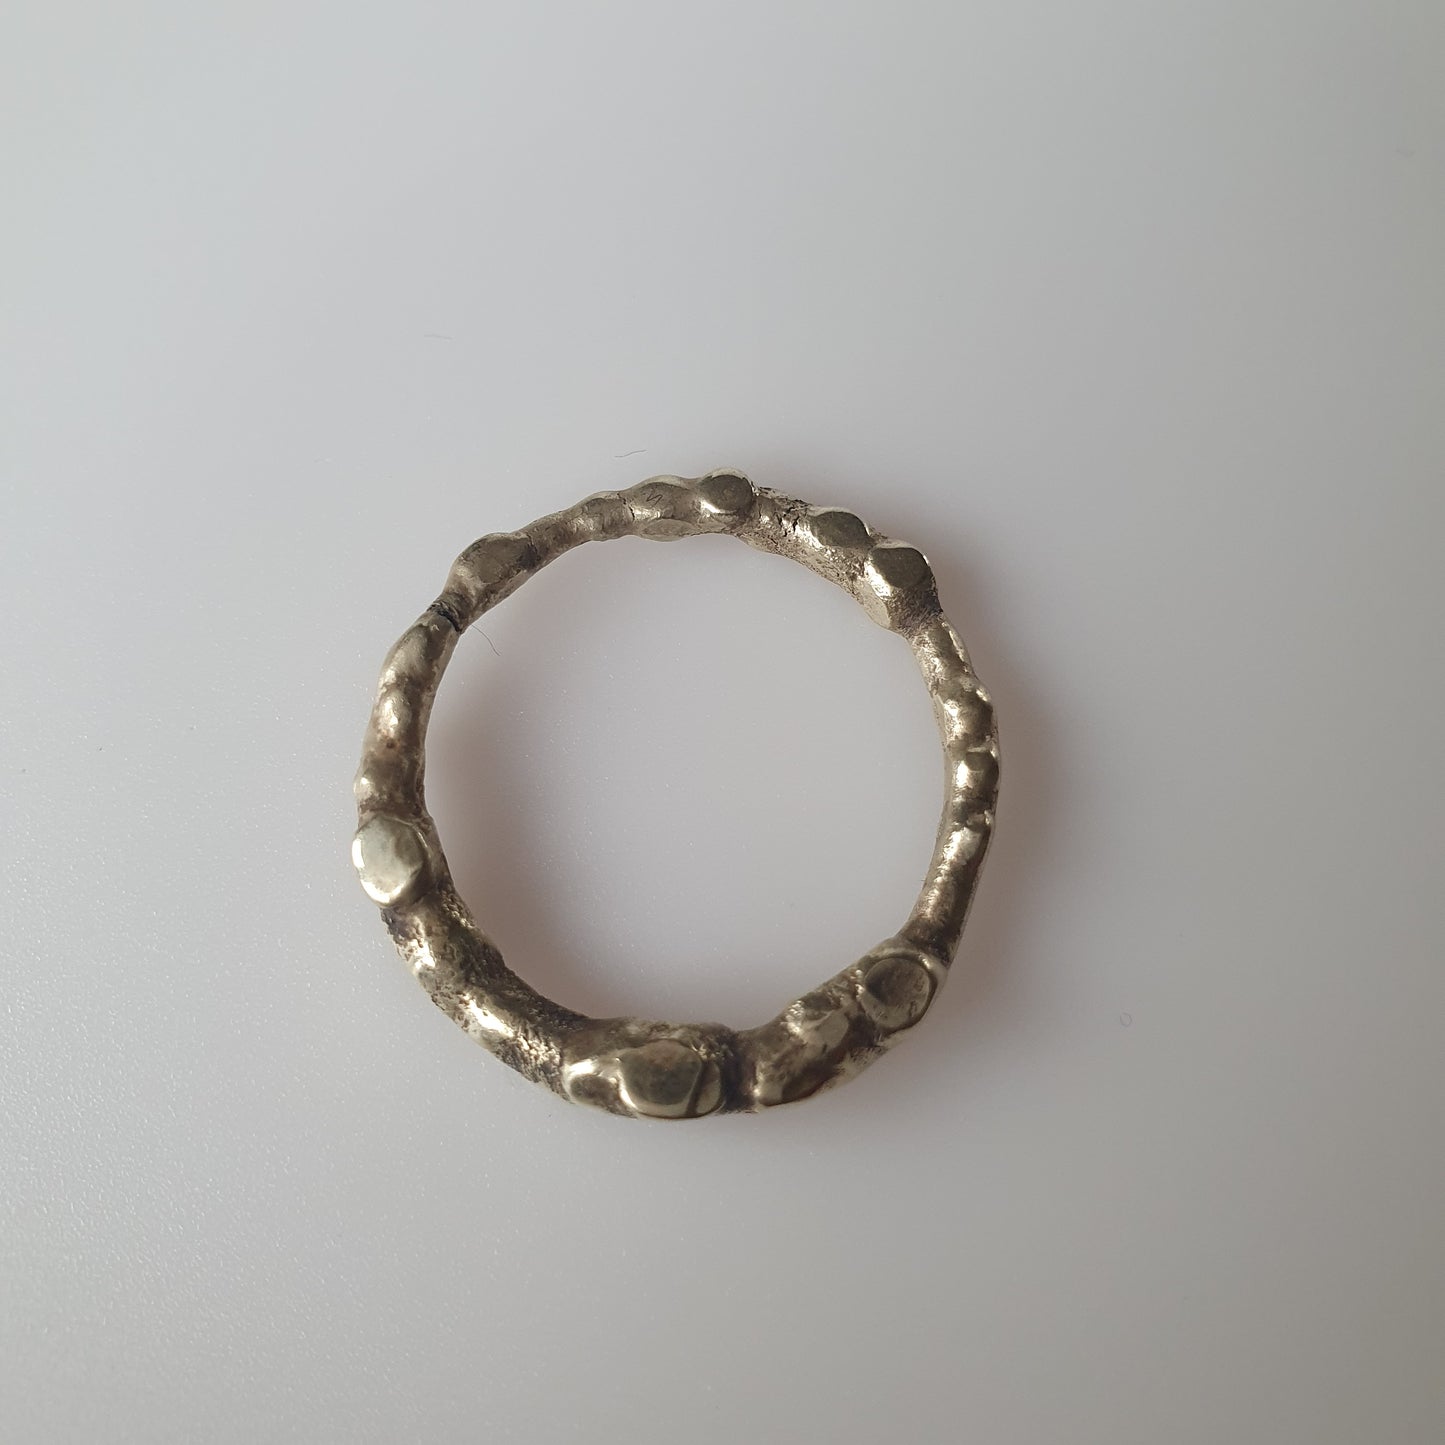 18ct gold plated on Sterling silver ring,Raw,Unrefined, Industrial,Bold,Unconventional,Edgy,Asymmetrical,Iregular,Chunky, Avant Garde, experimental, vintage